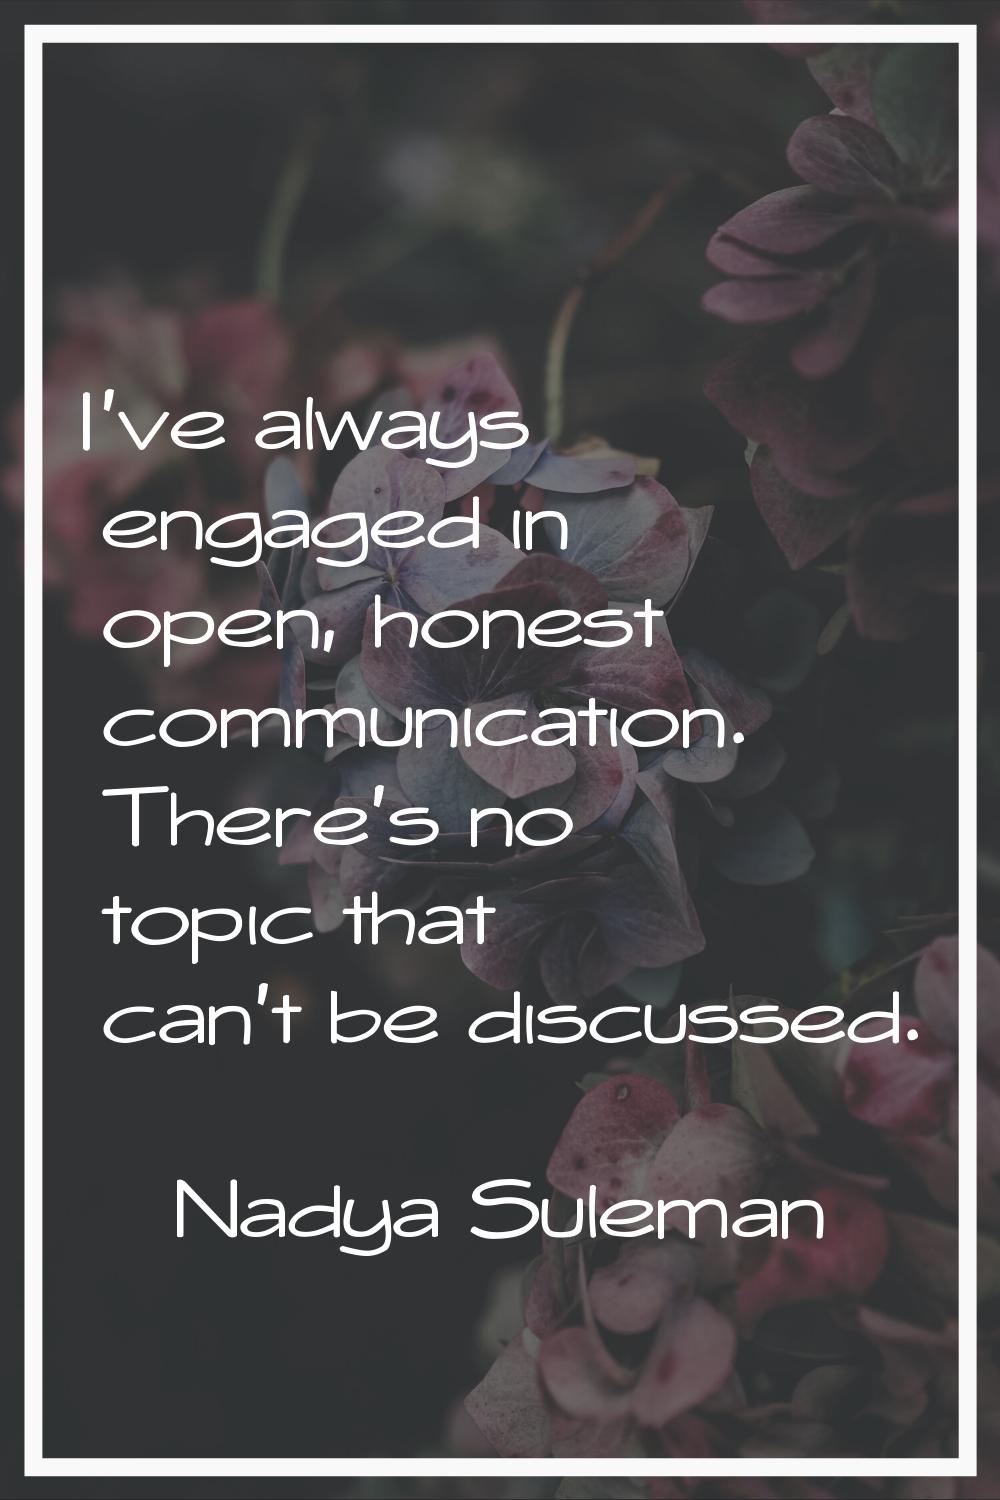 I've always engaged in open, honest communication. There's no topic that can't be discussed.